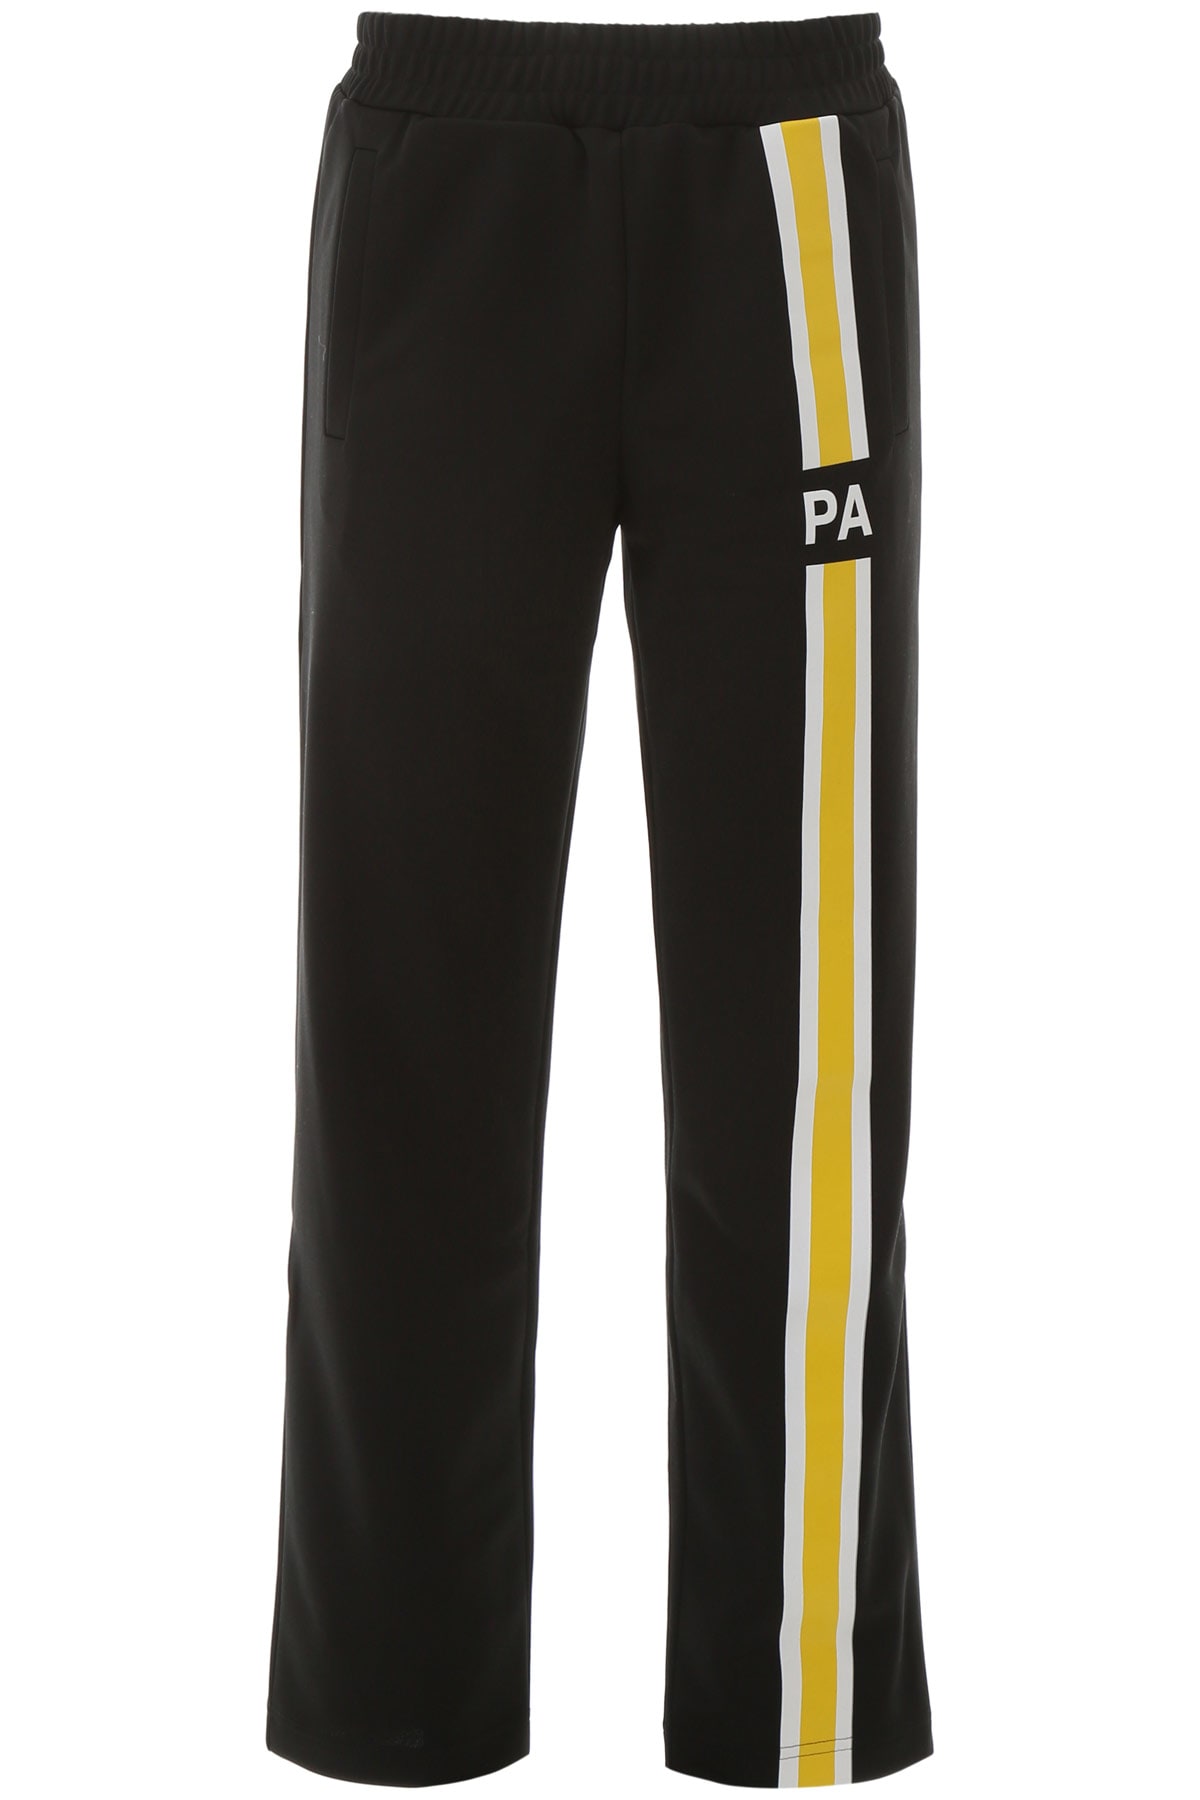 PALM ANGELS JOGGER PANTS WITH INITIALS,PMCA007S20384031 1060